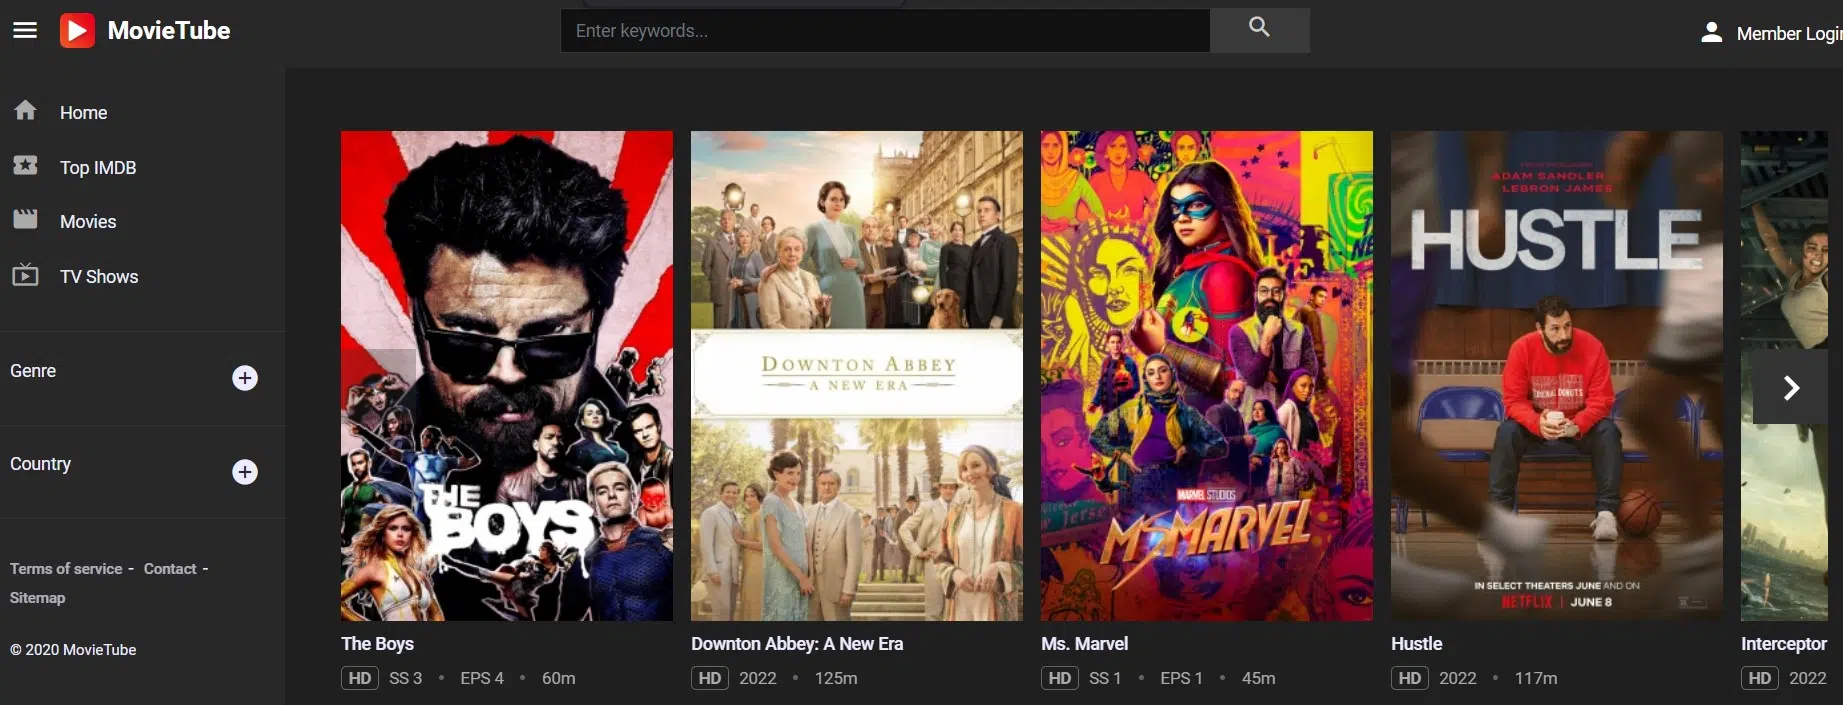 Movie Tube Online: Free Movie Streaming Services 